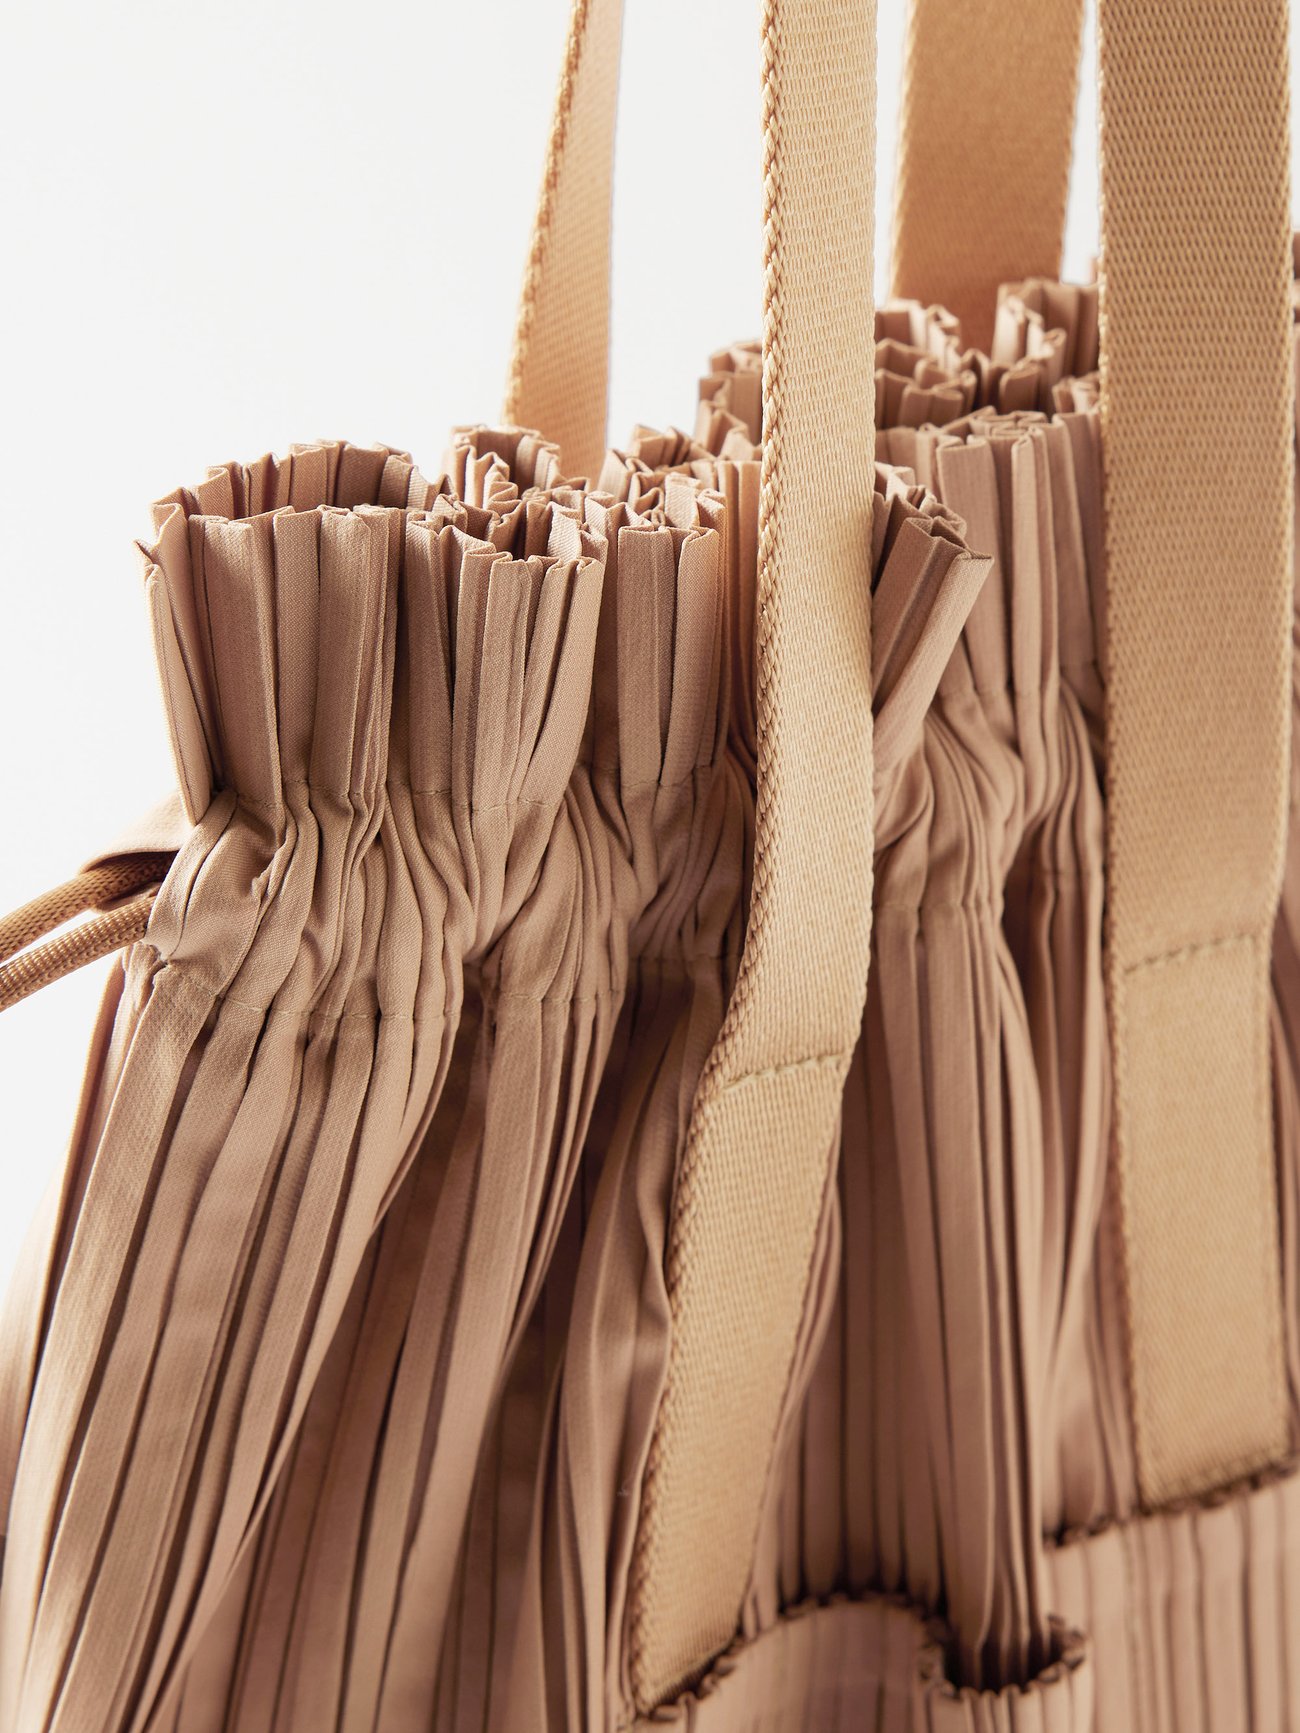 Beige Pleats large technical-pleated tote bag